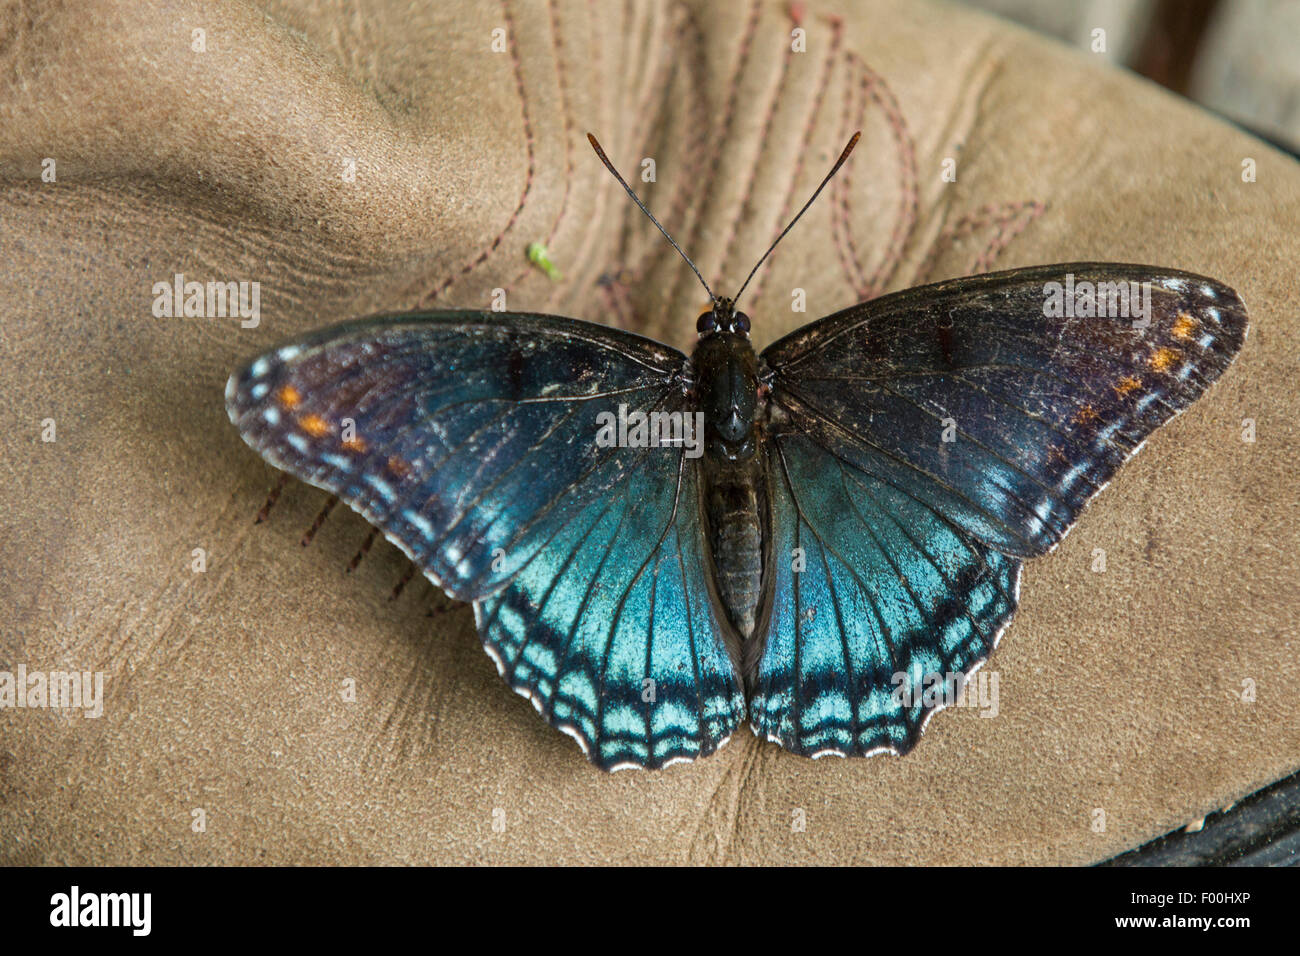 Red-spotted lila (Limenitis Arthemis Astyanax), saugt die Mineralien aus einem Leder Stiefel, USA, Tennessee, Great Smoky Mountains National Park Stockfoto